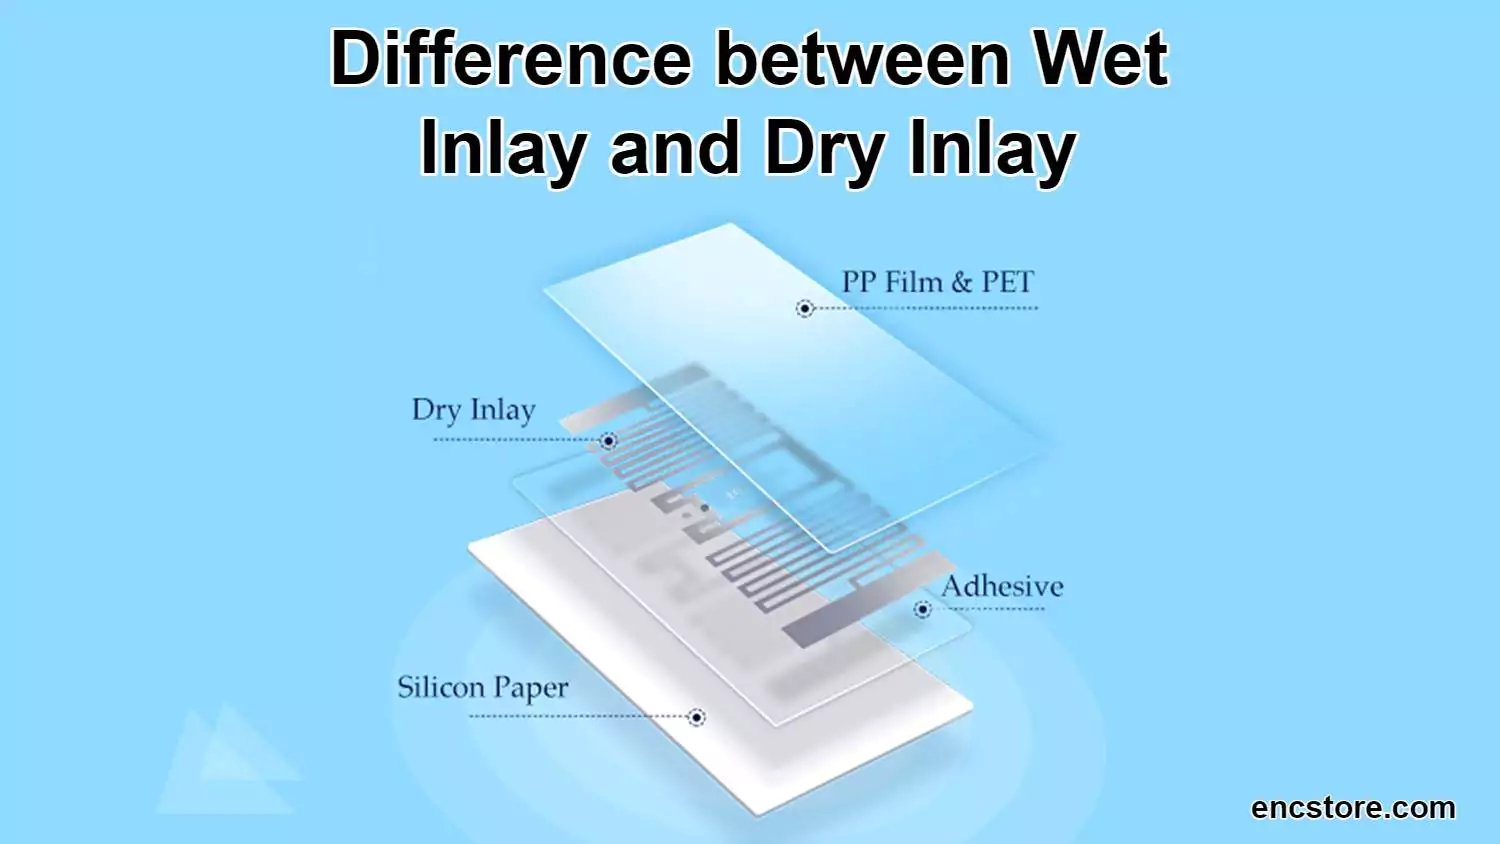 Difference between RFID Wet Inlay and Dry Inlay